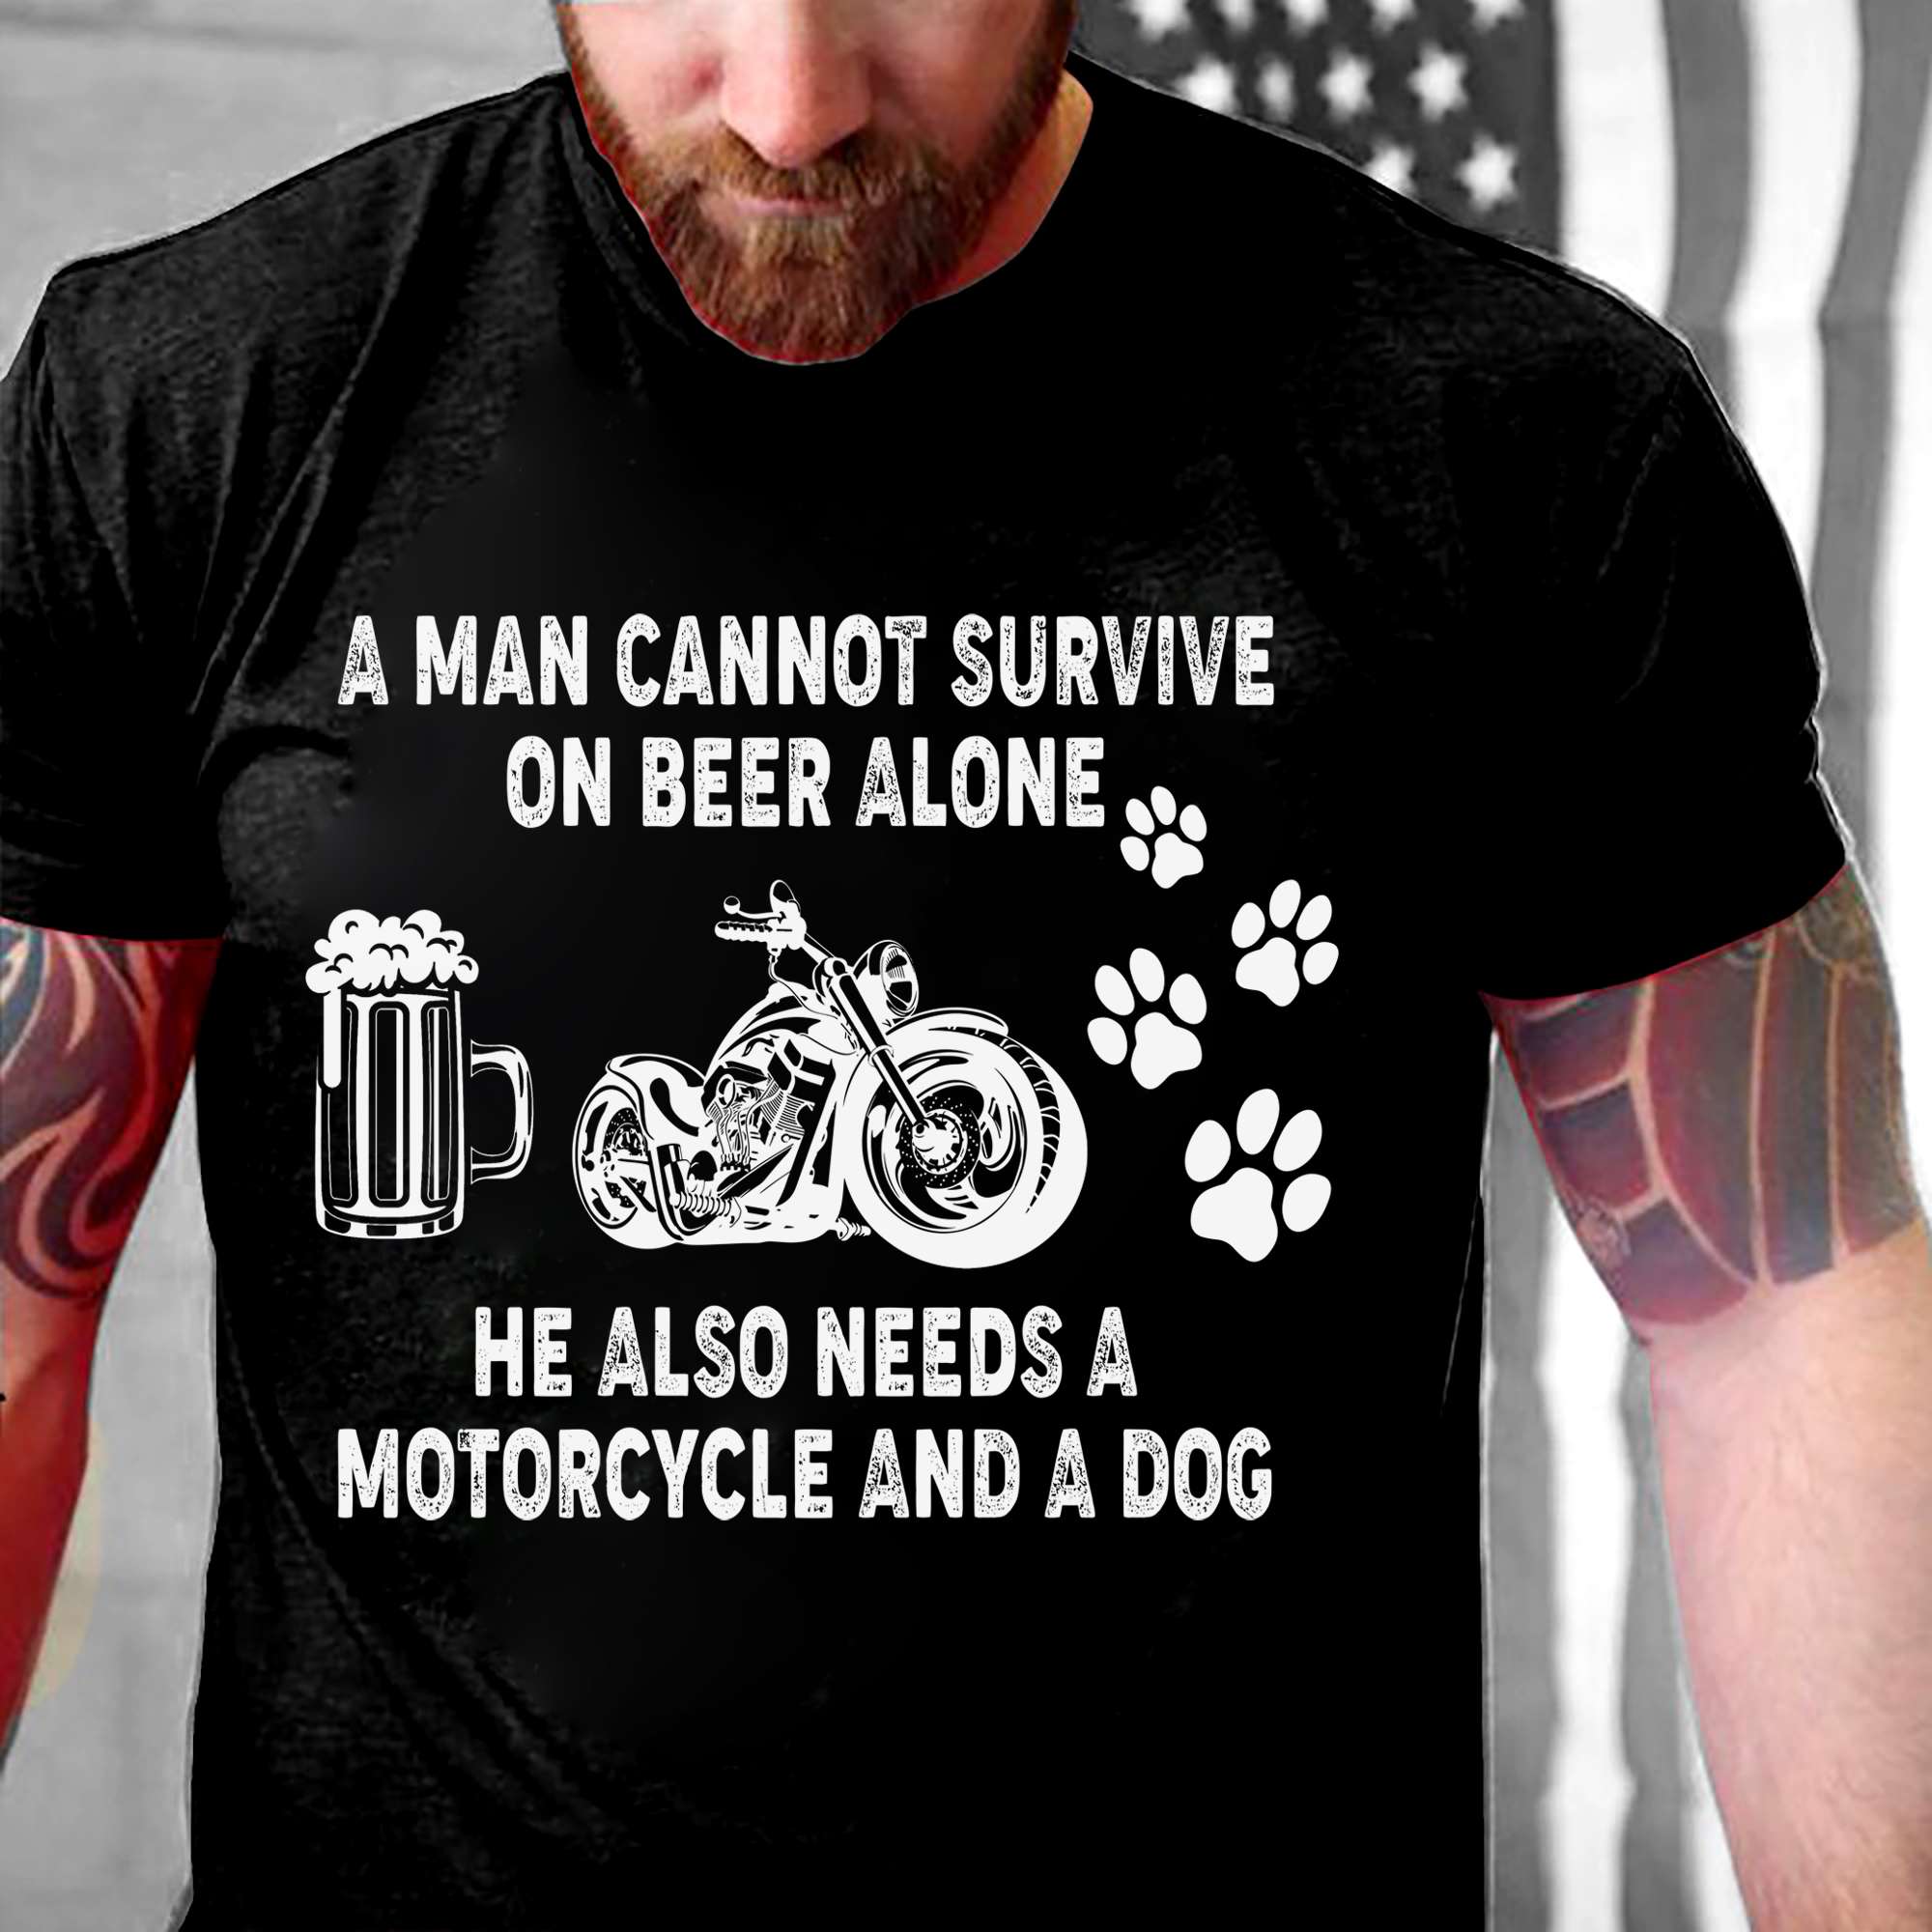 A man cannot survive on beer alone he also needs a motorcycle and a dog